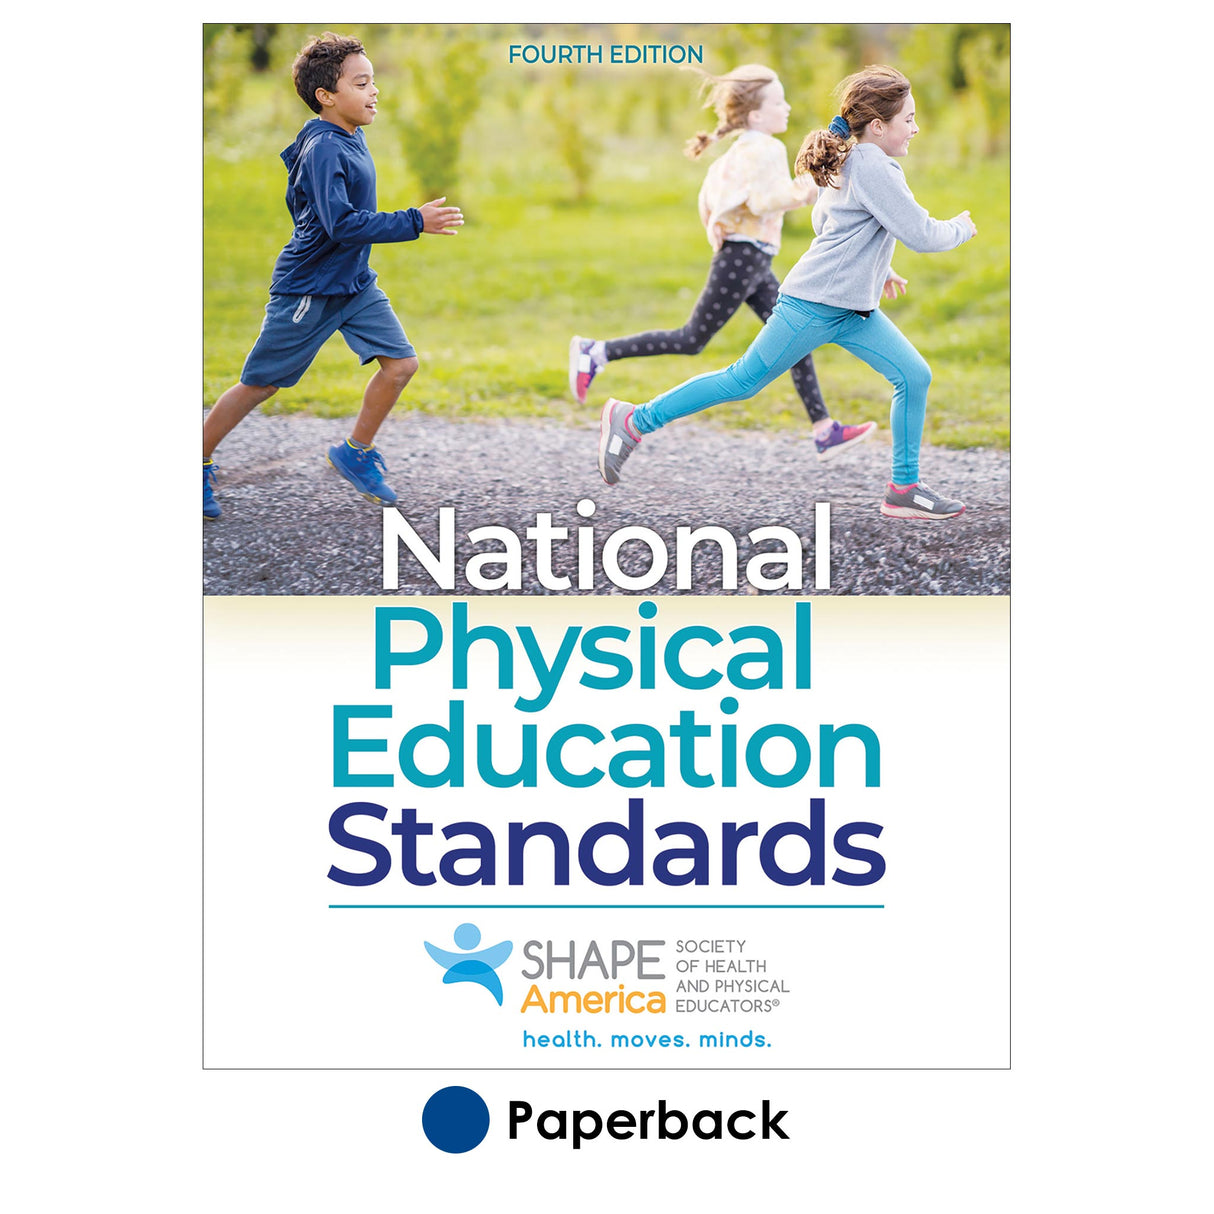 National Physical Education Standards-4th Edition